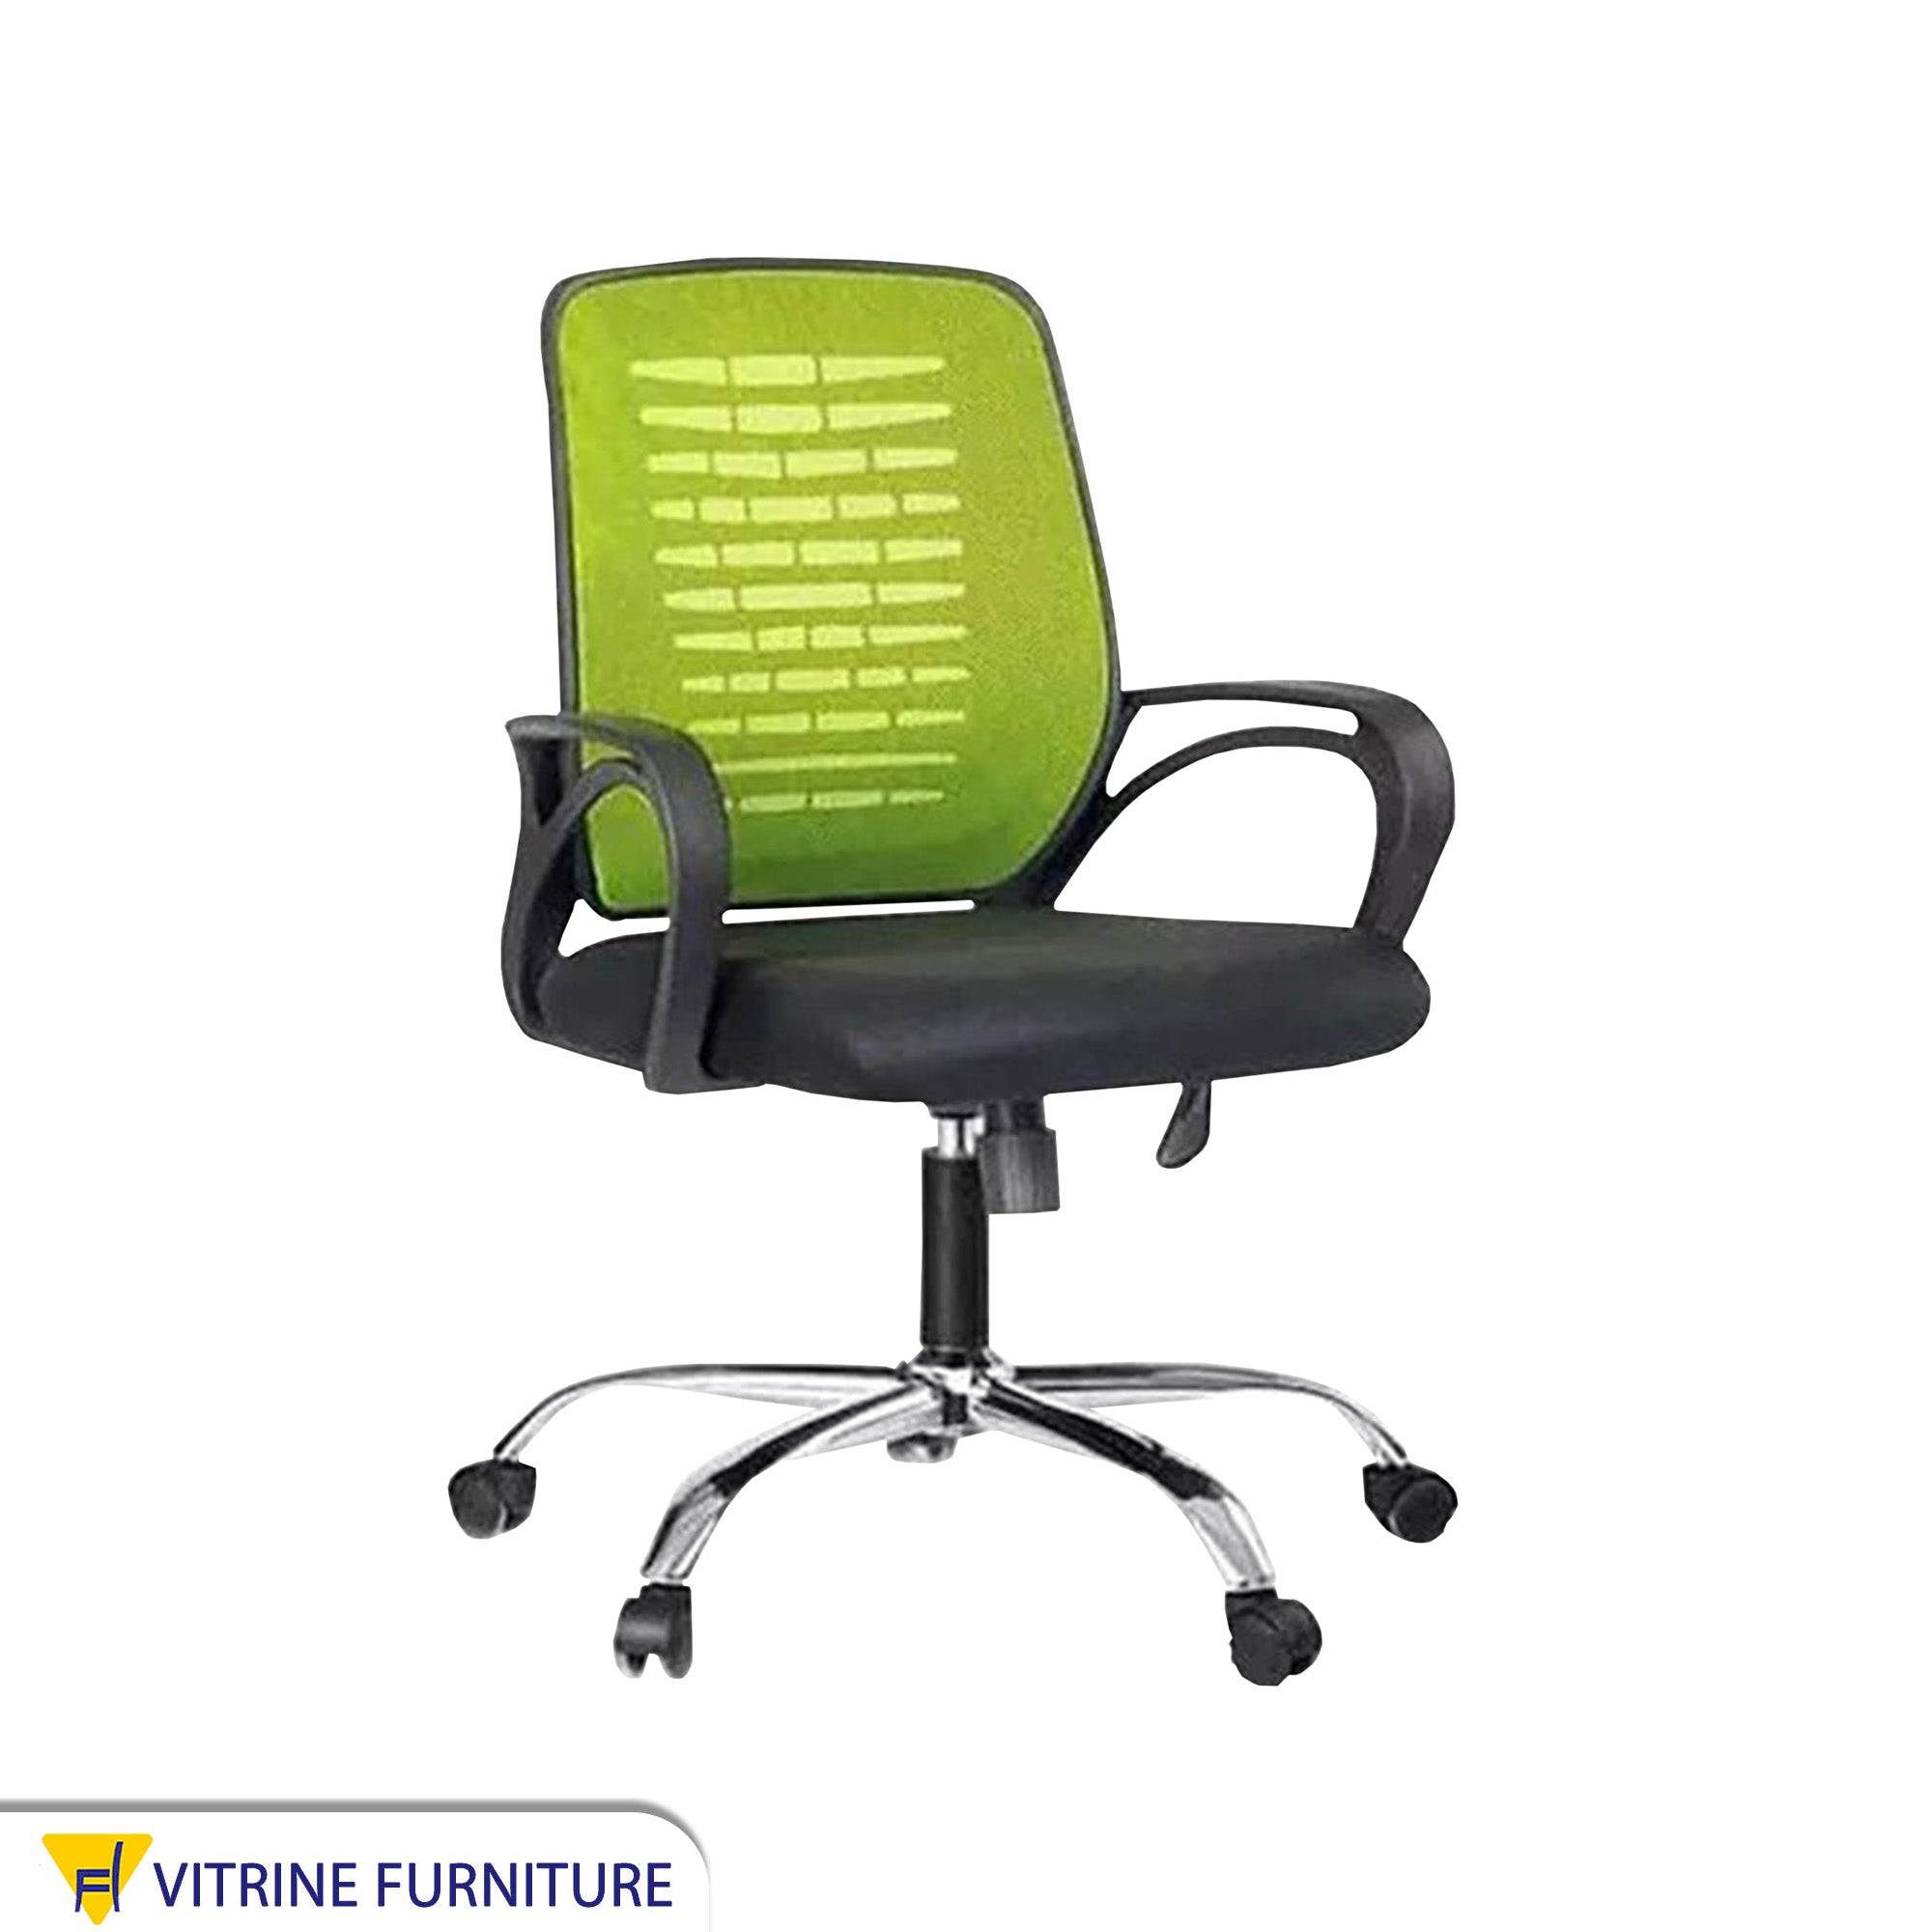 Green office chair with metal legs